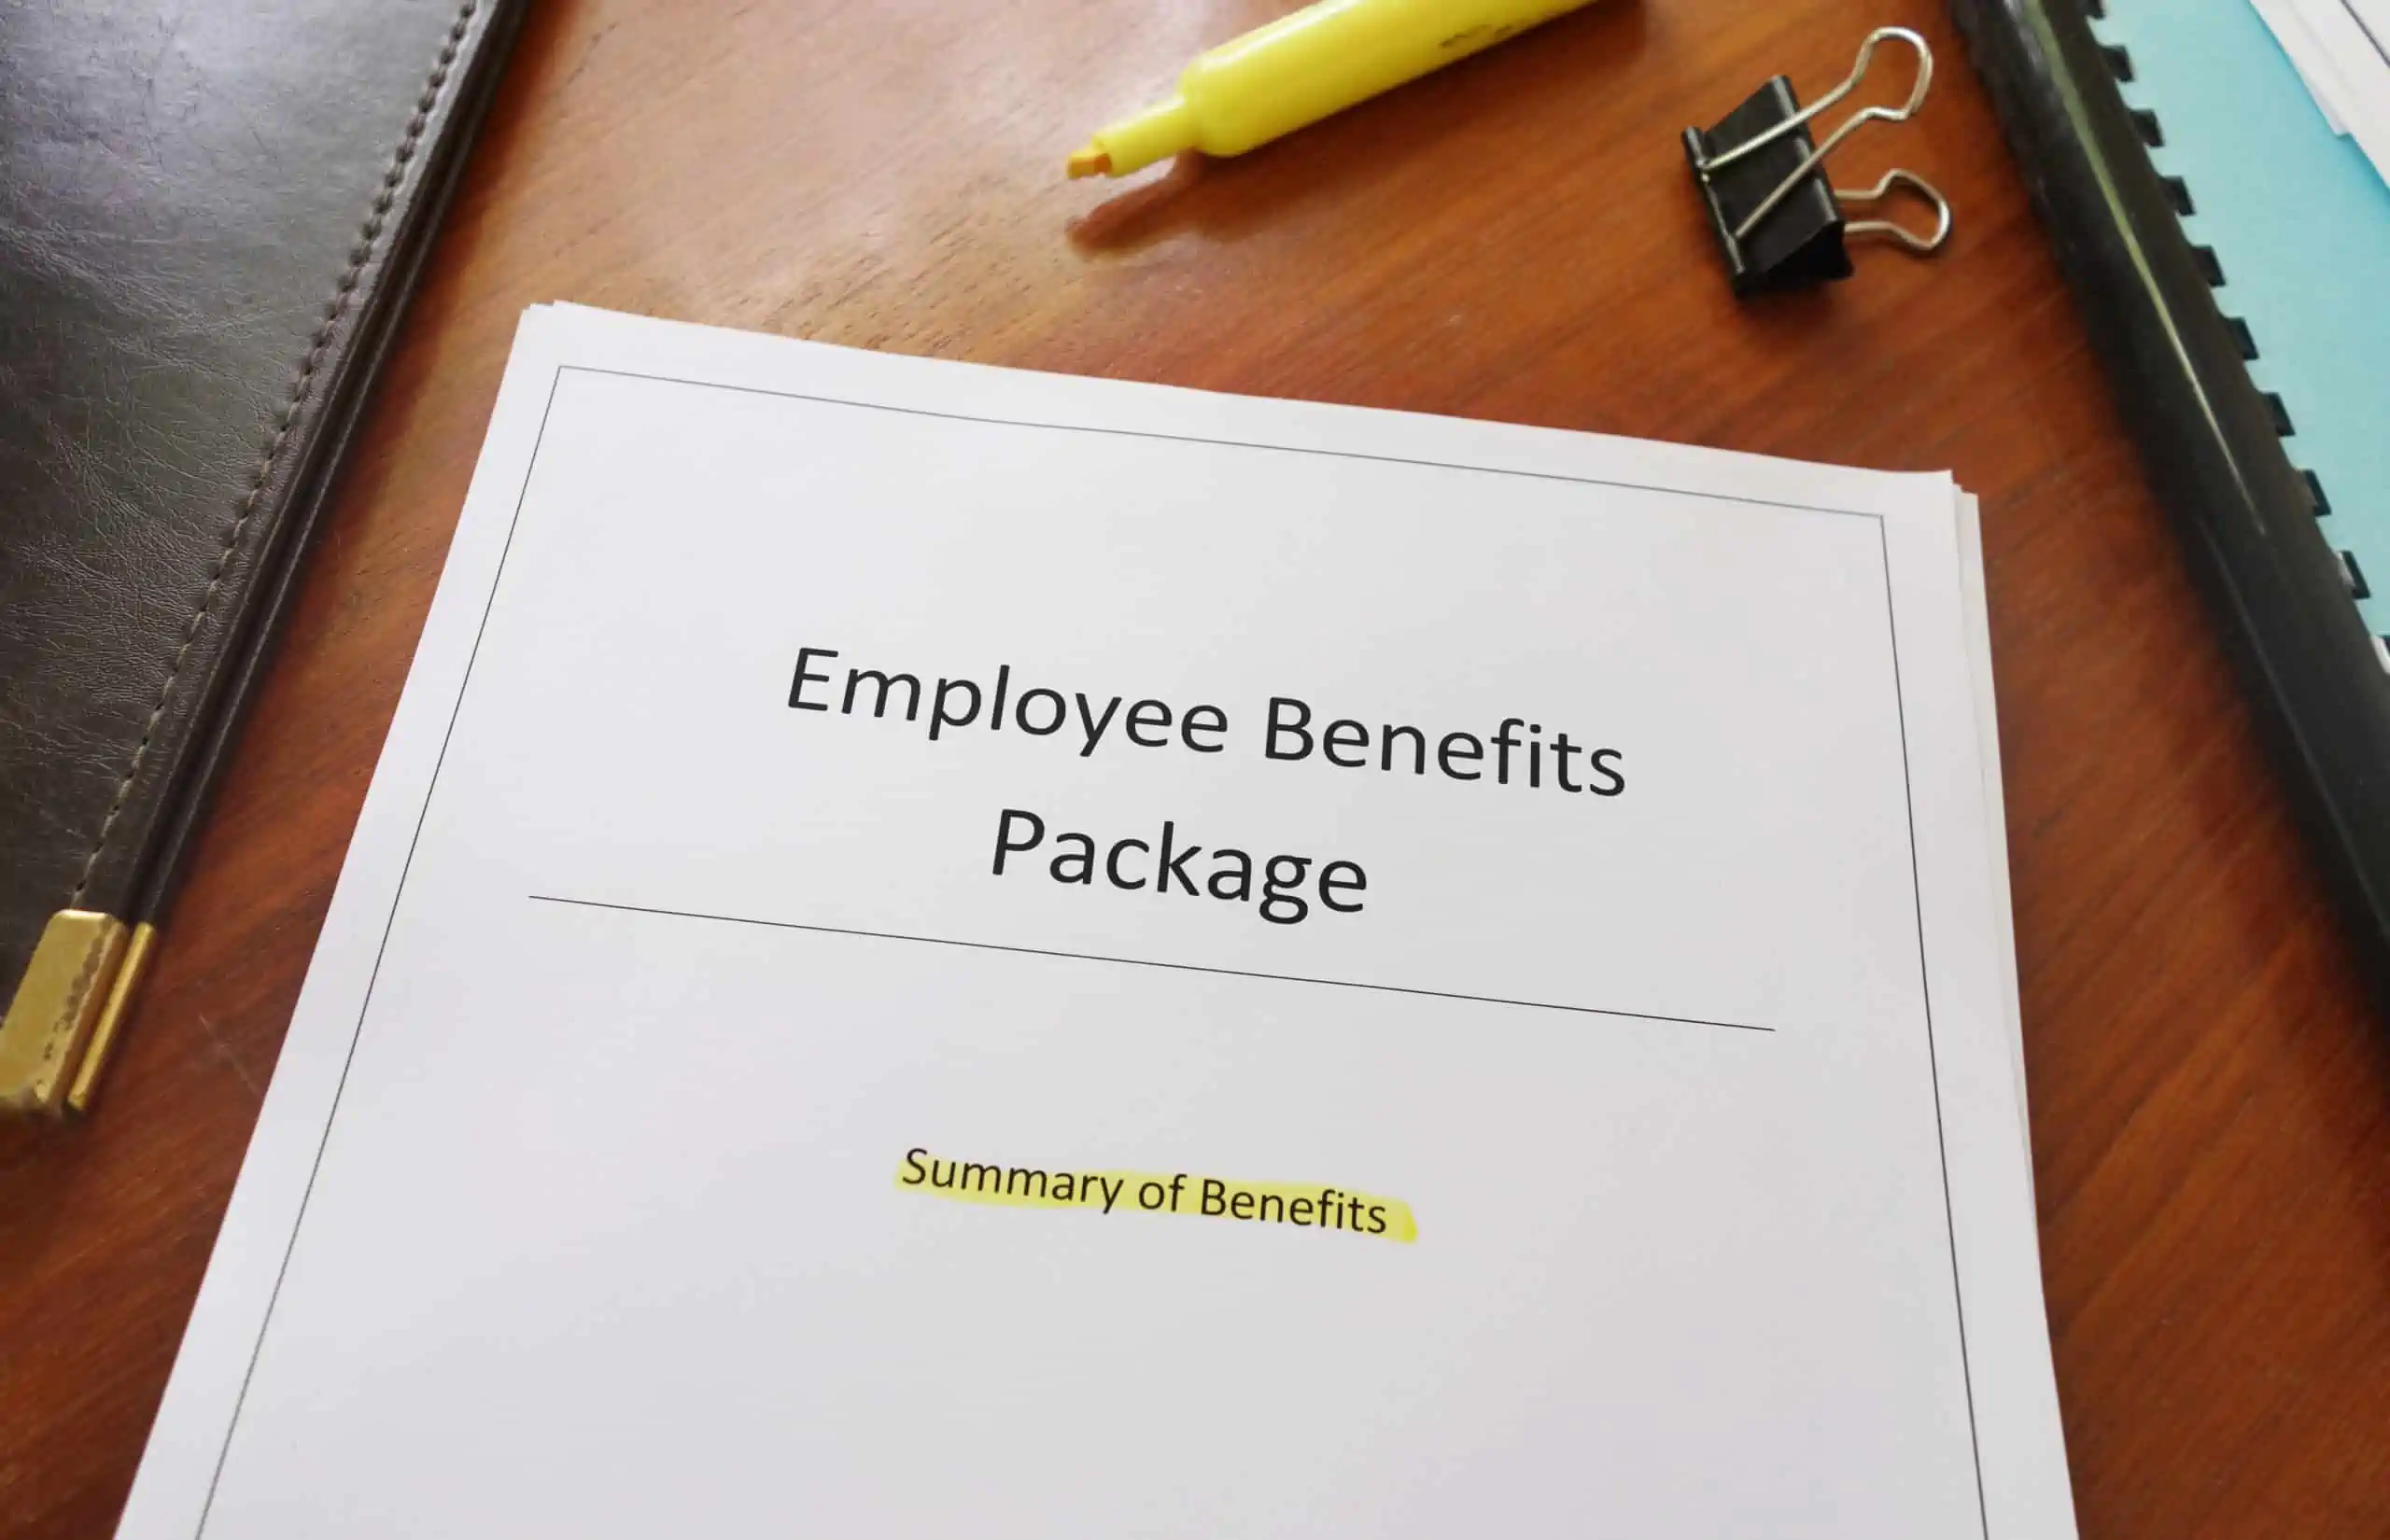 Employee benefits package handbook containing payroll deductions and paycheck calculation information